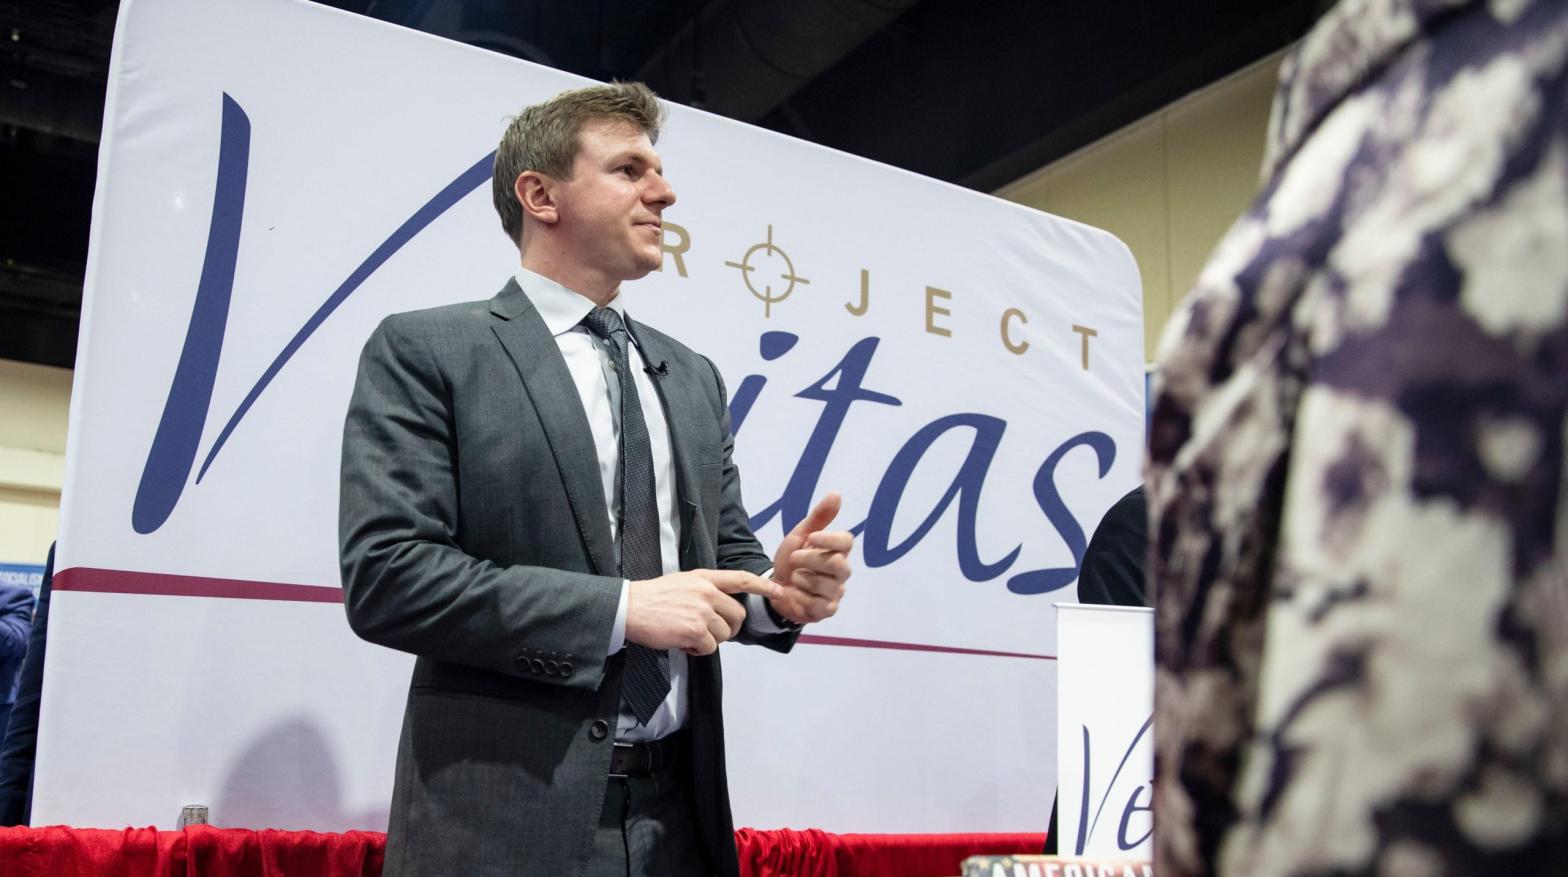 Project Veritas founder James O'Keefe at Conservative Political Action Conference (CPAC) 2020. (Photo: Samuel Corum, Getty Images)